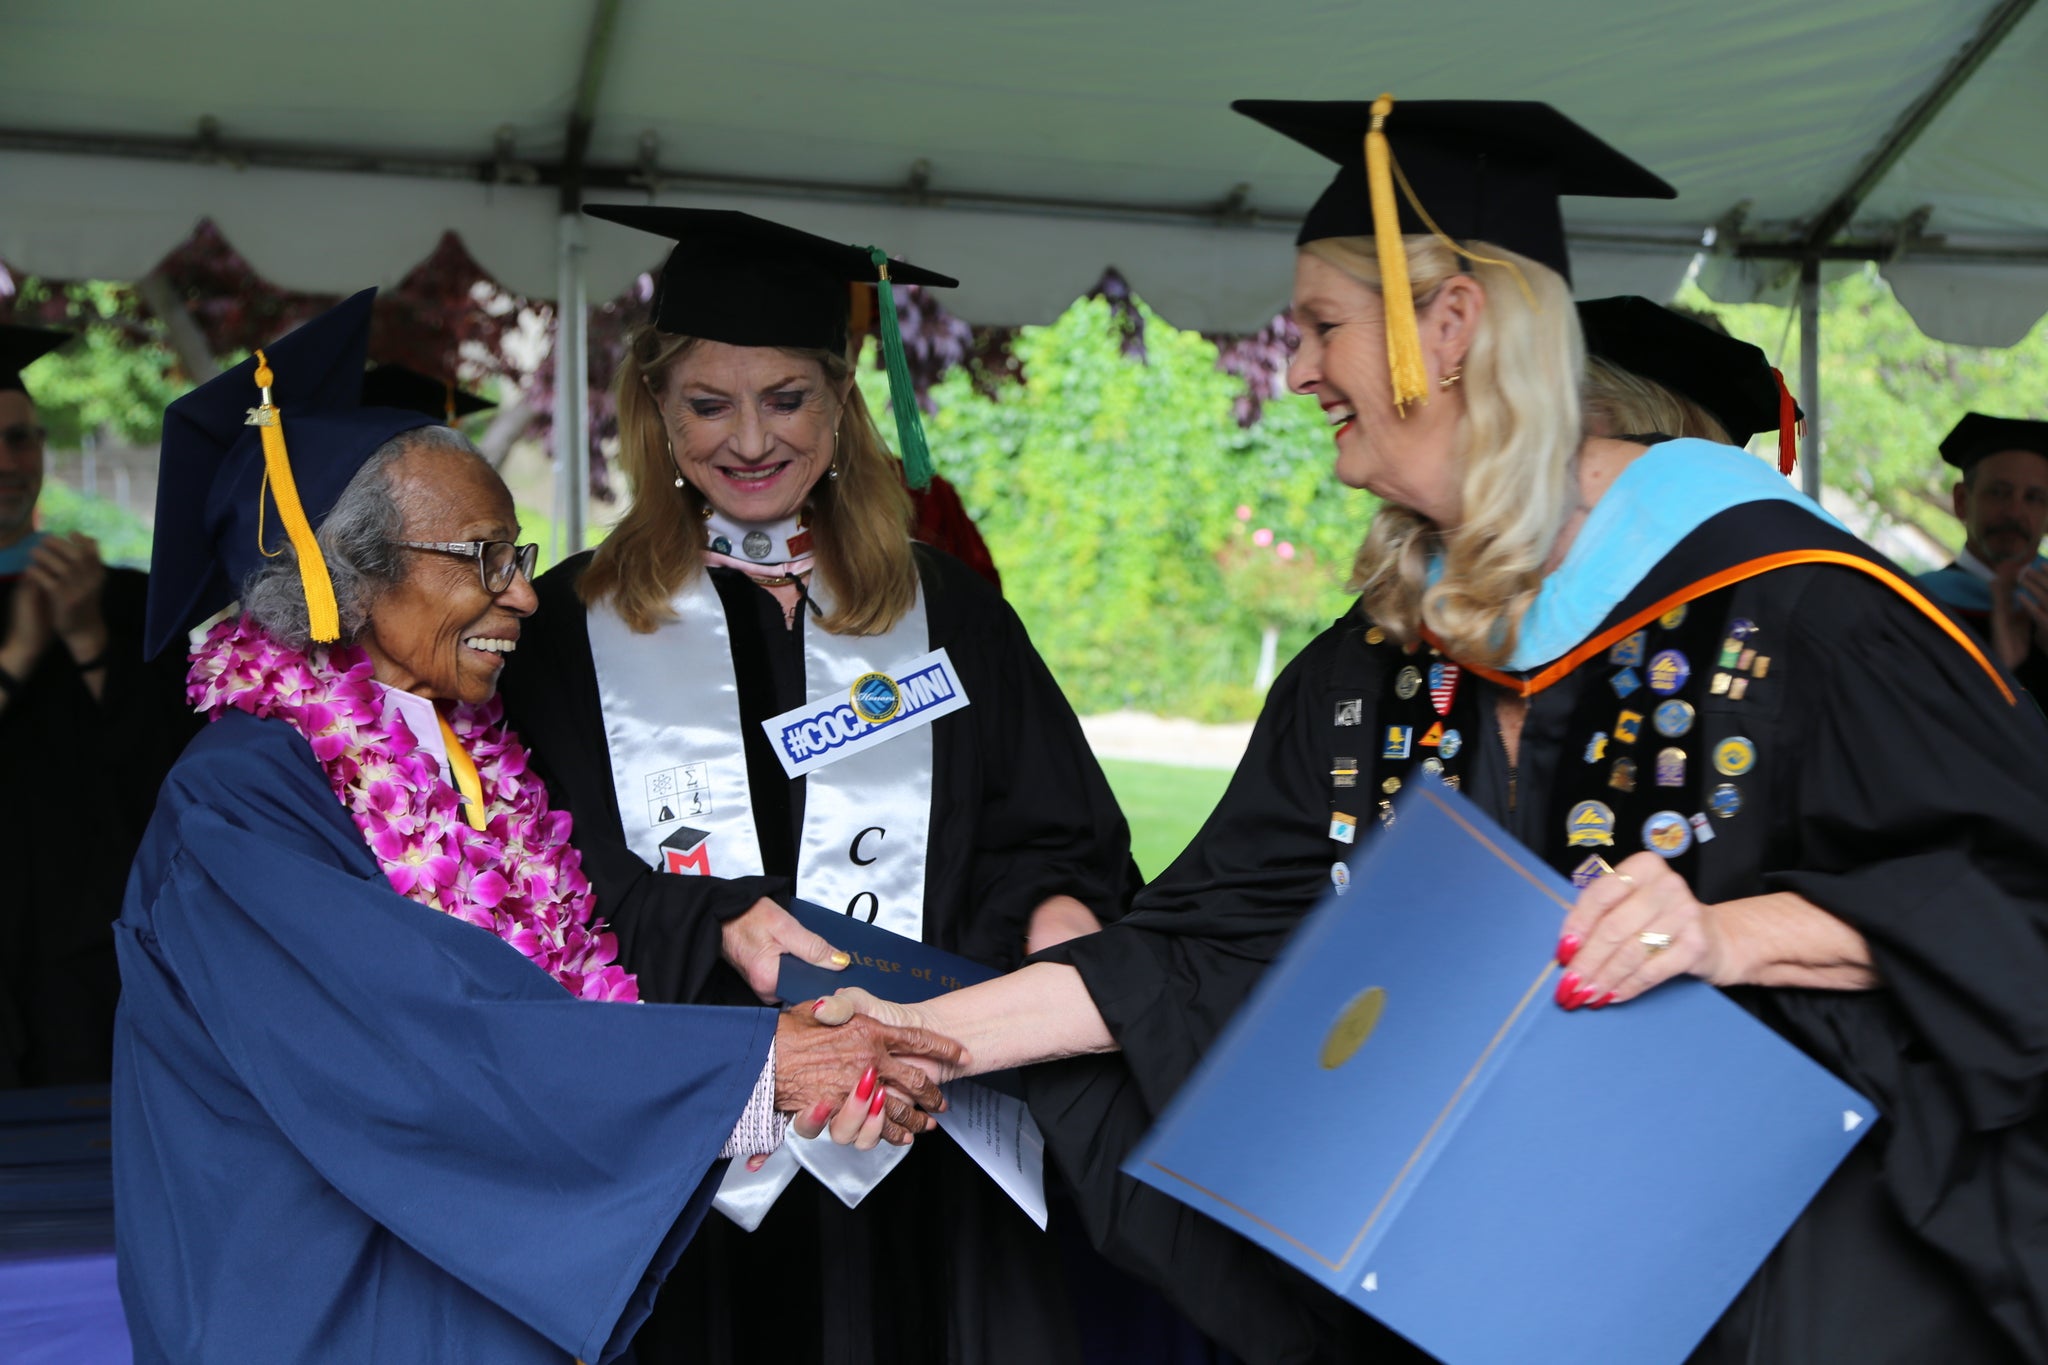 99-year-old Doreetha Daniels received cheers and tears as she collected her college degree